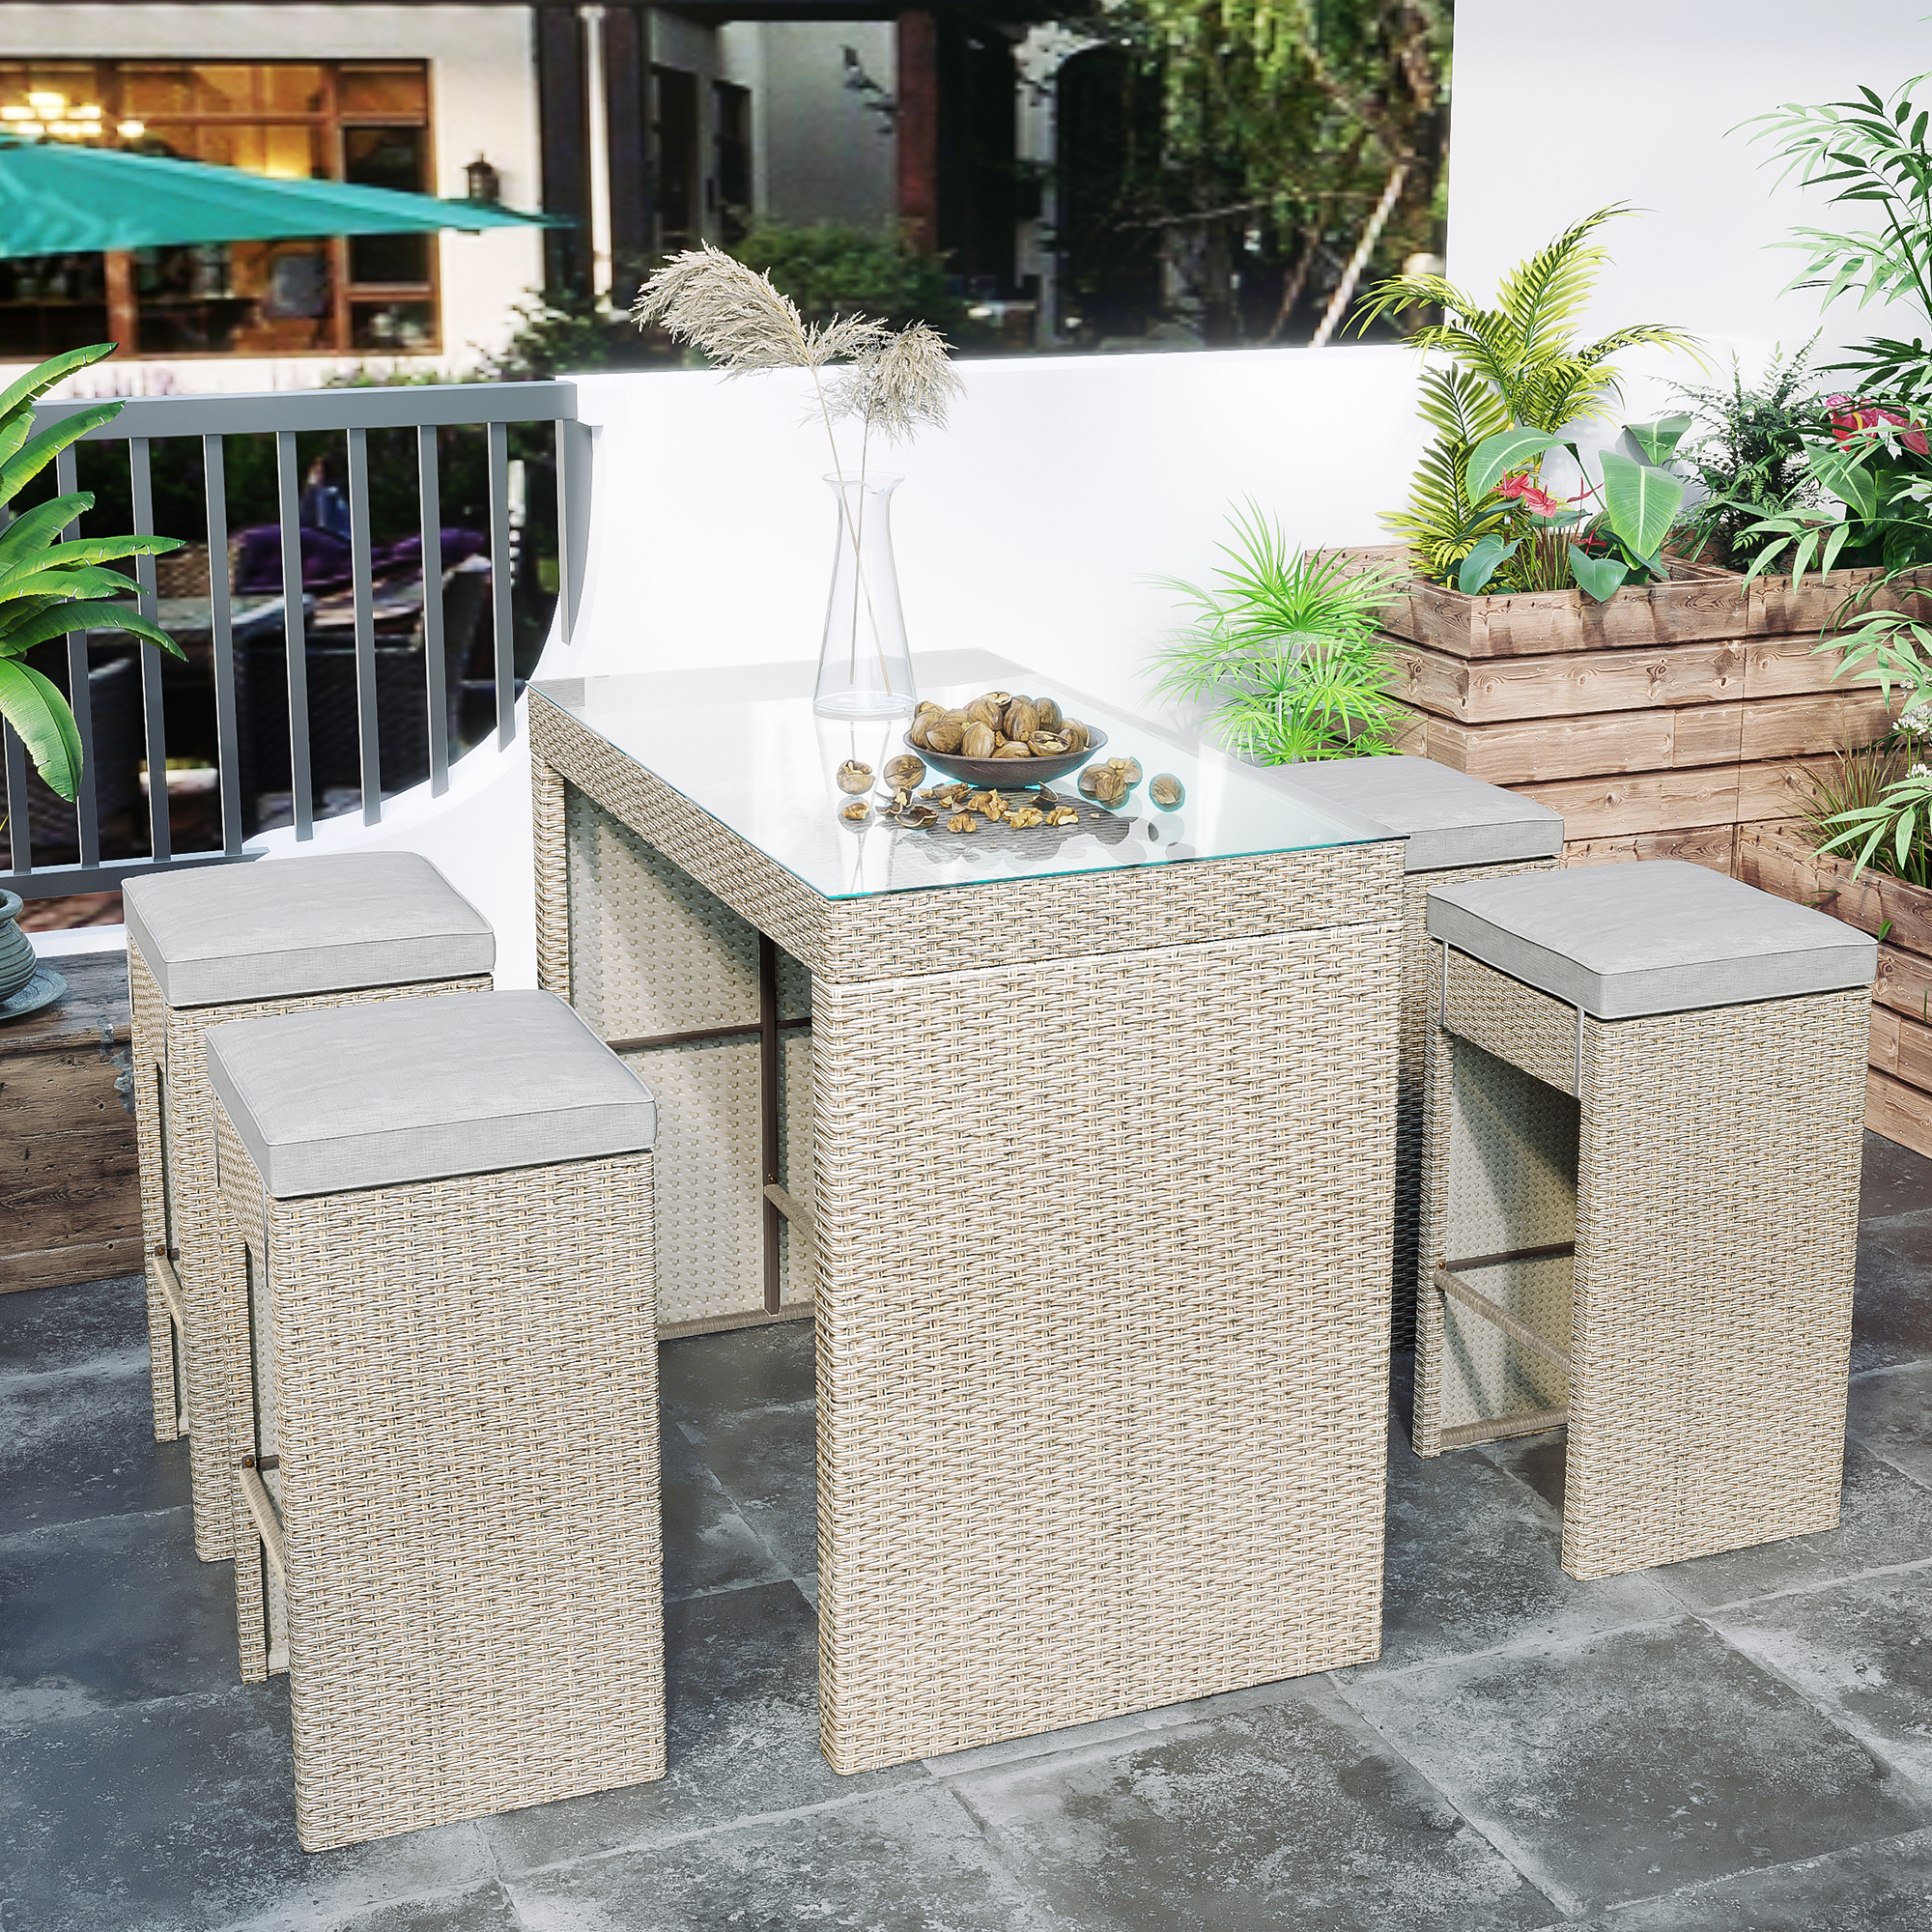 5-Piece Rattan Outdoor Patio Furniture Set with 4 Stools - SH000238AAD